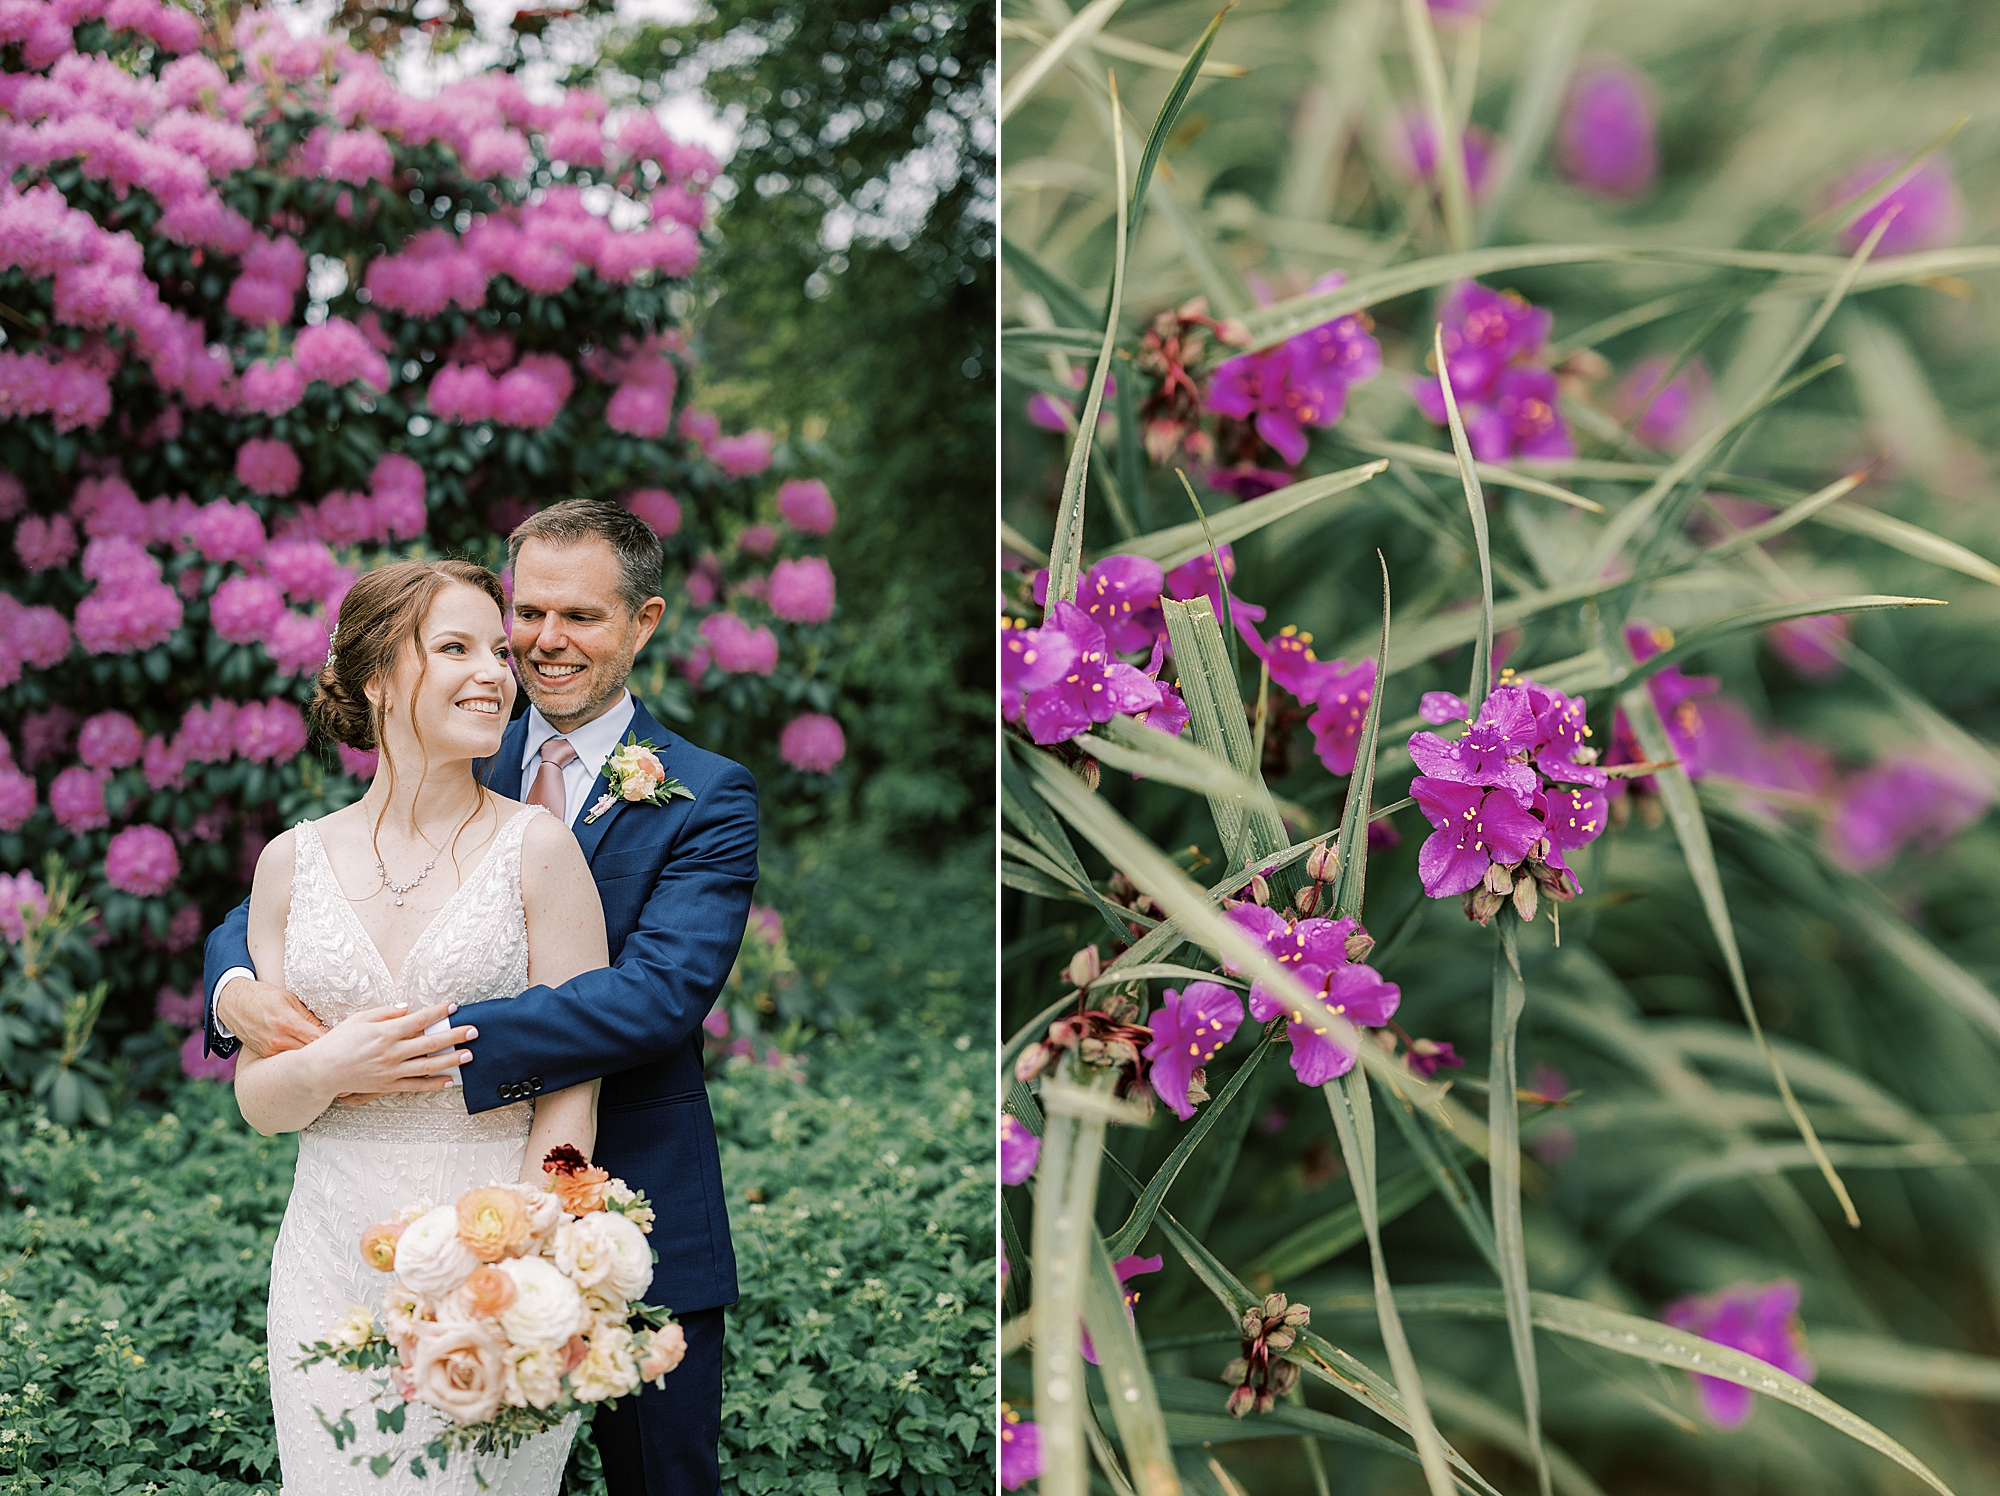 groom hugs bride around middle while she holds bouquet below her hip in gardens by purple flowers 